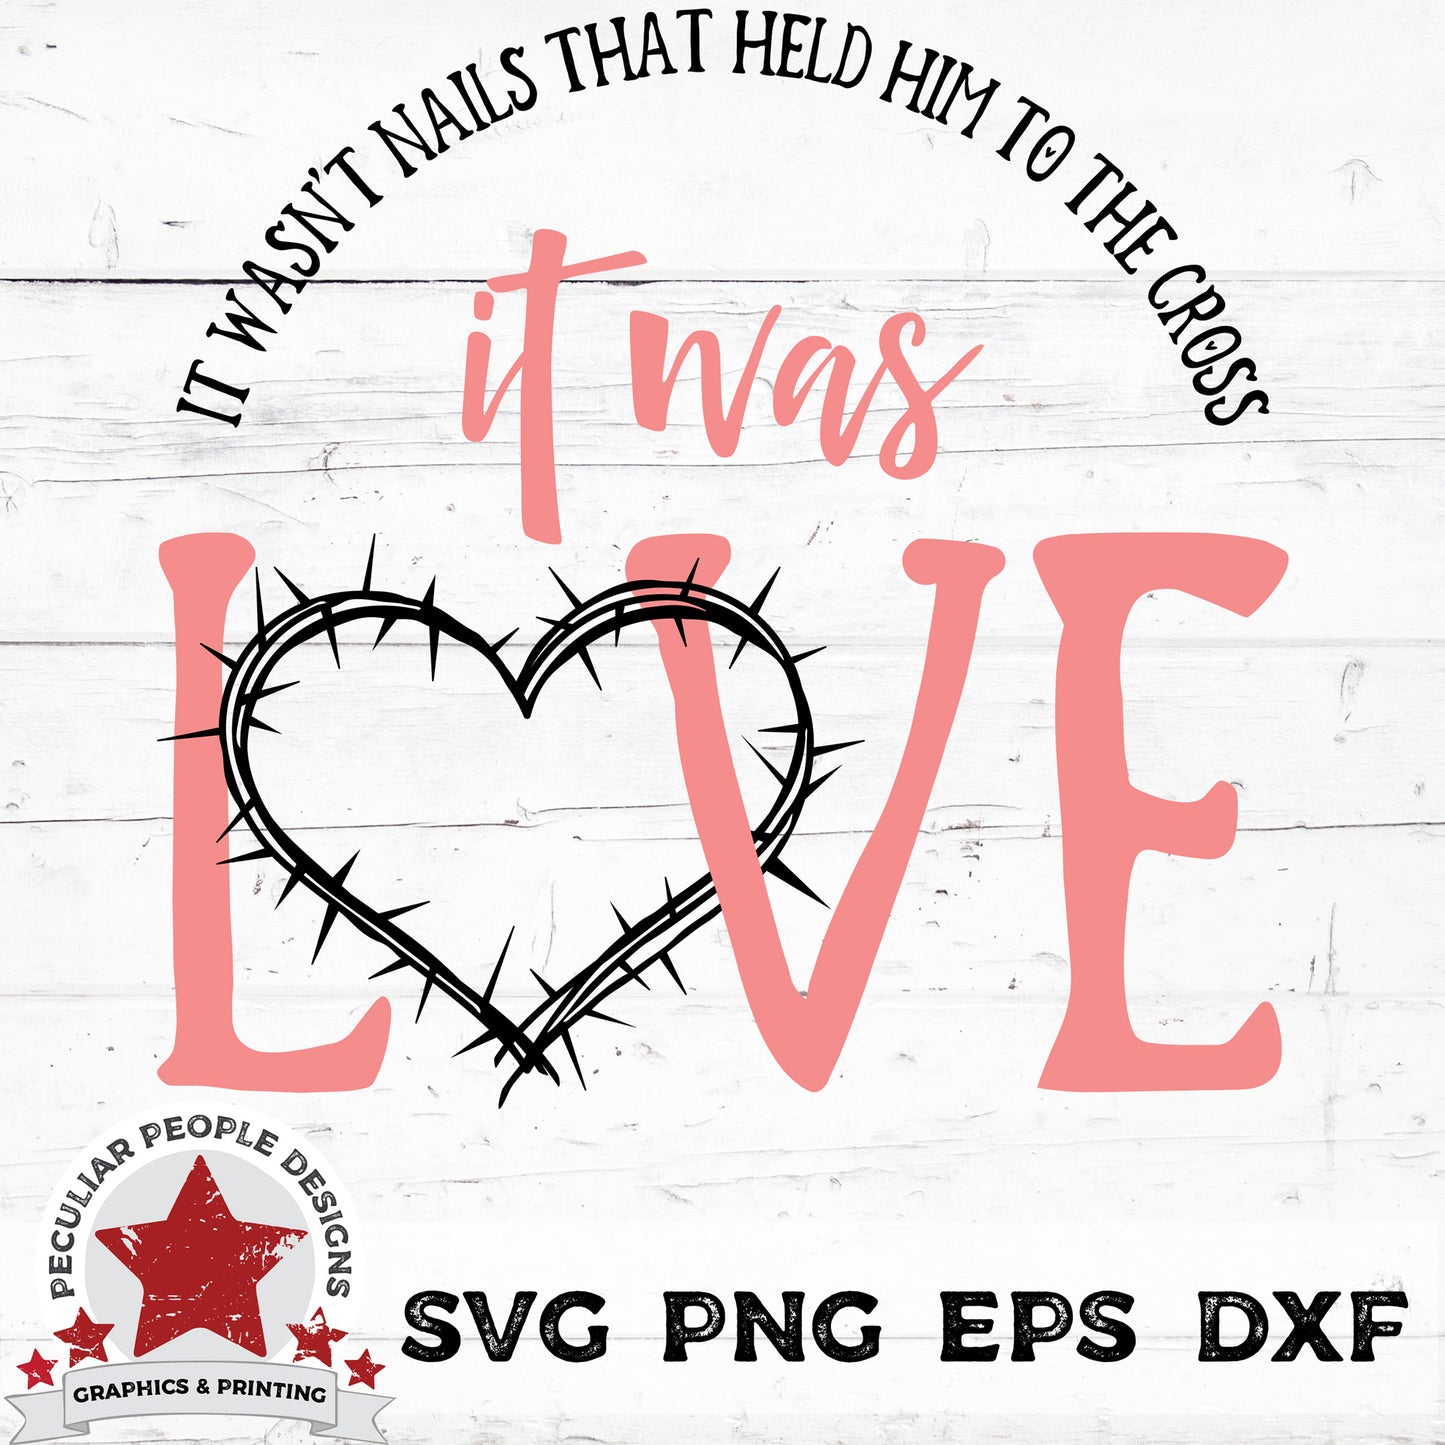 
                  
                    it wasn't nails that held him to the cross, it wa love, svg png eps dxf cut files by peculiar people designs
                  
                